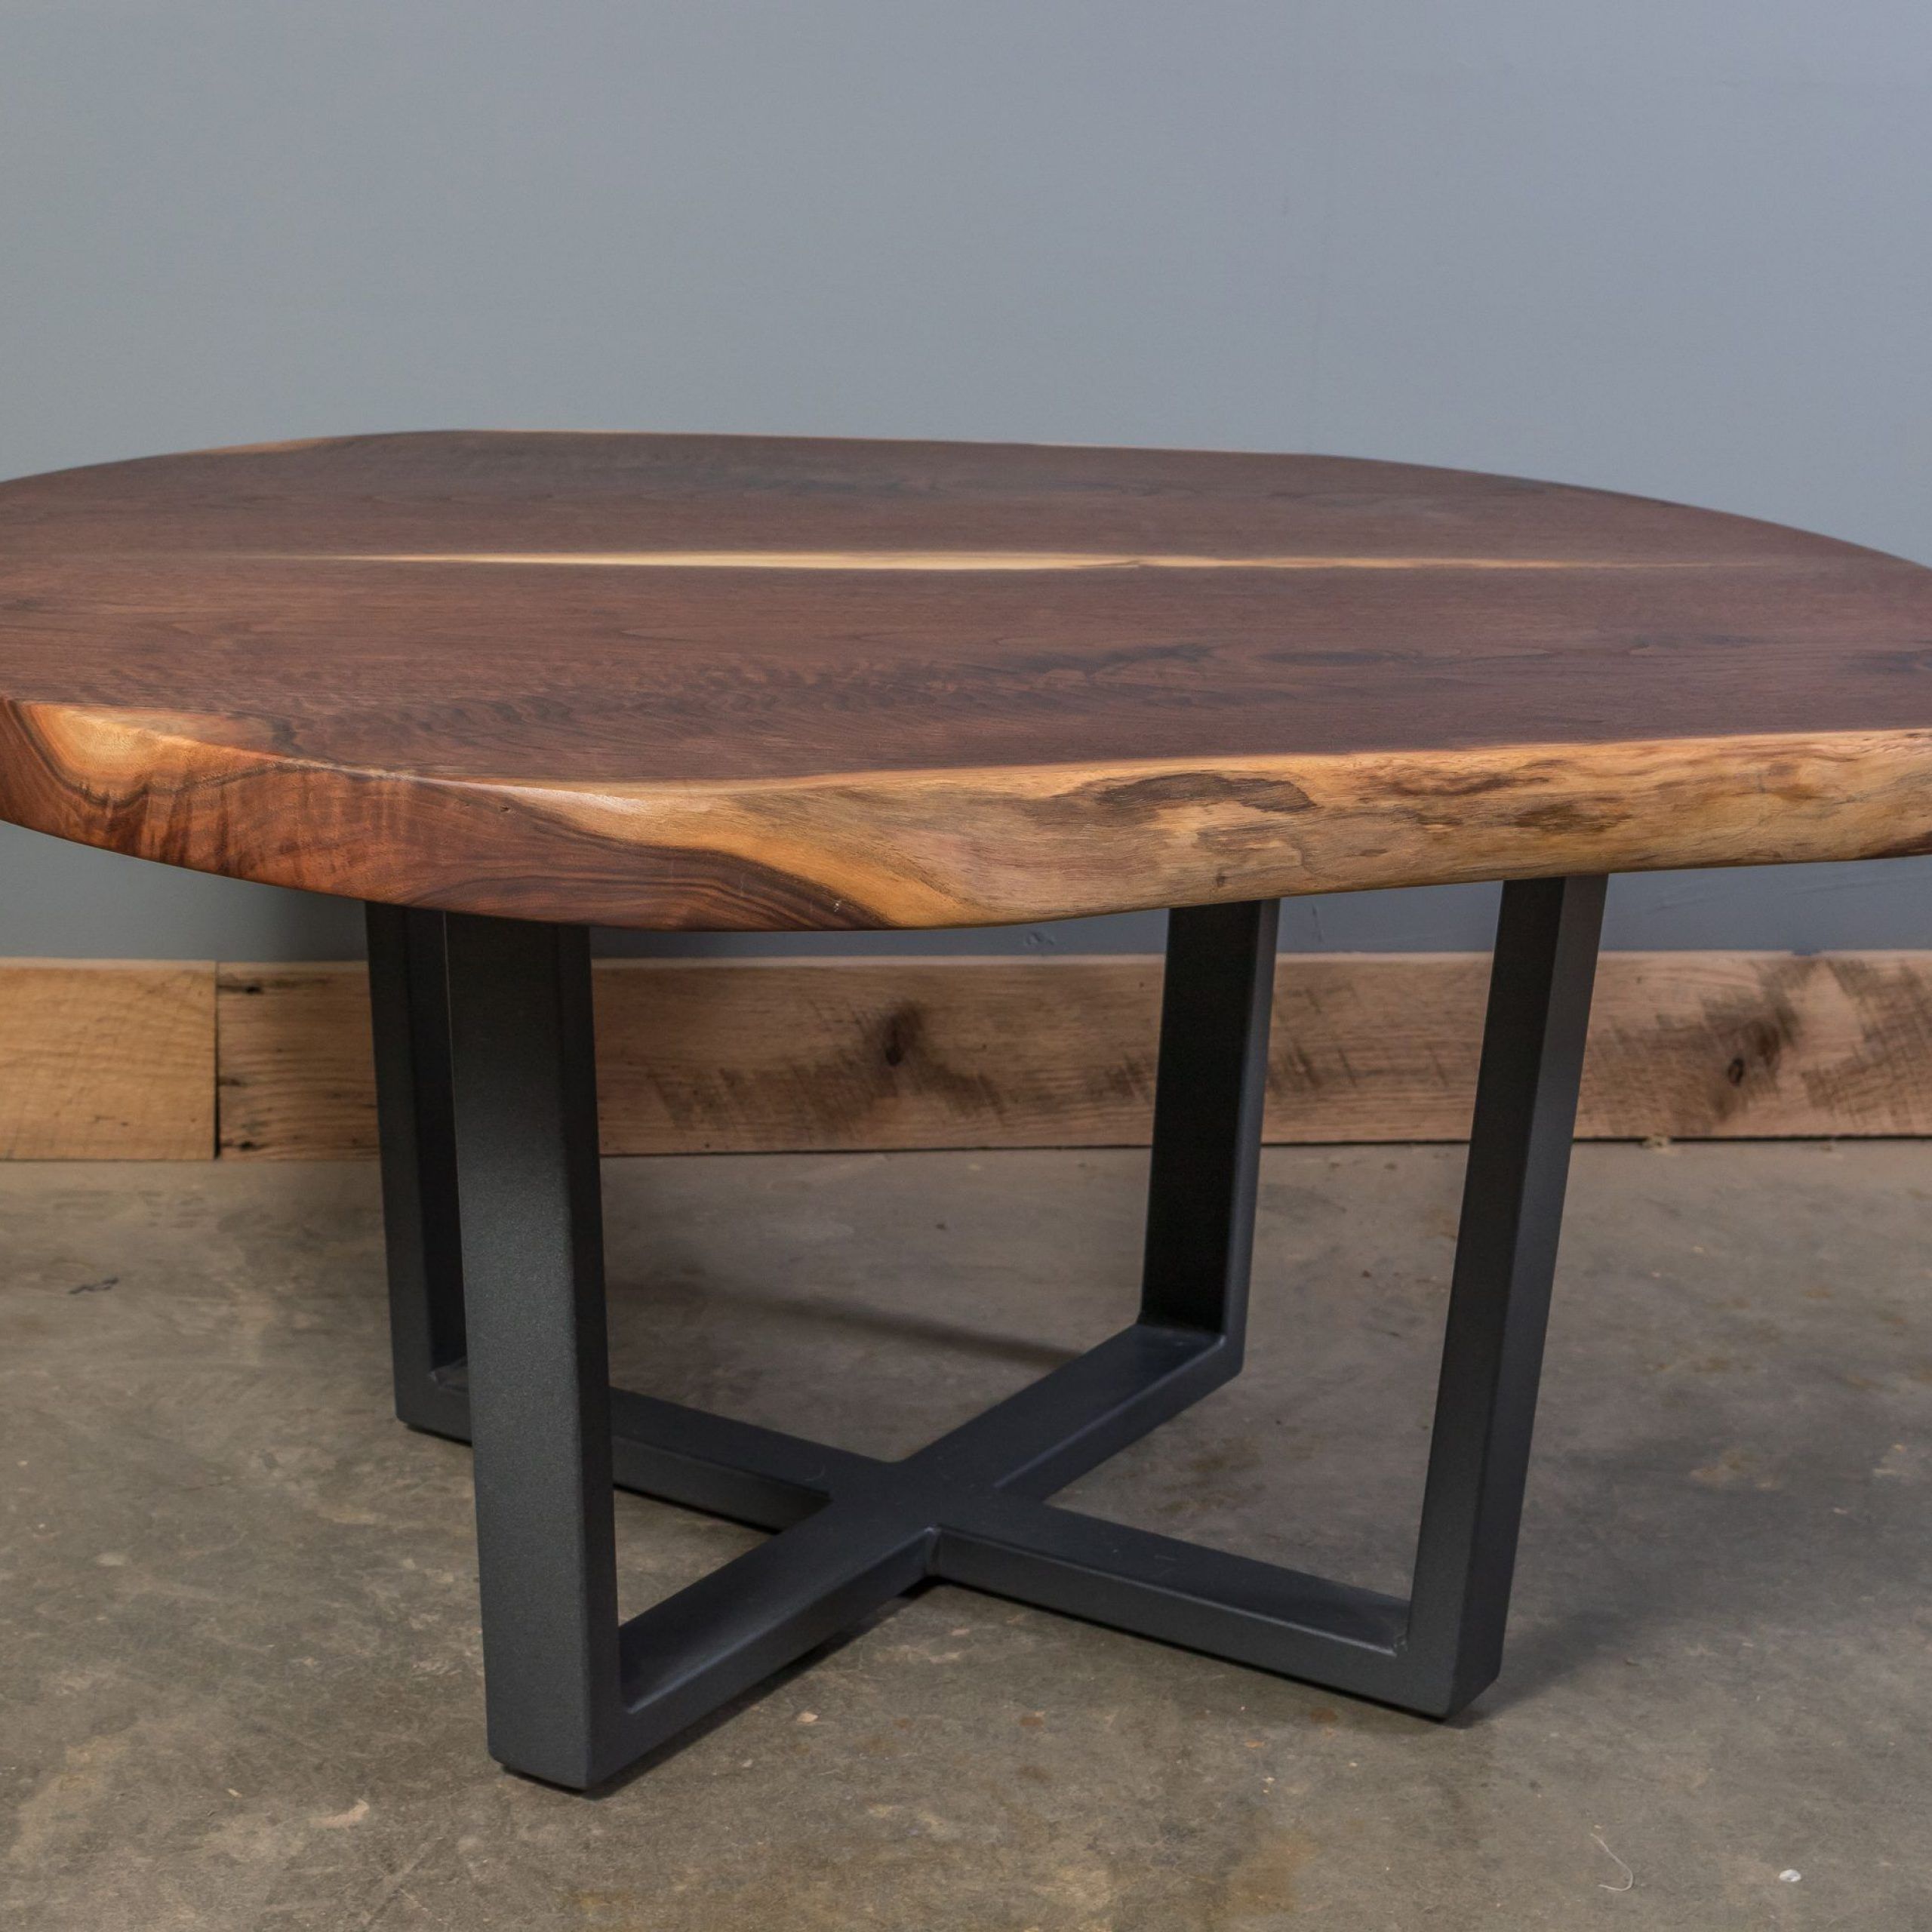 Buy Handmade Live Edge Black Walnut Coffee Table, Made To With Regard To Latest Walnut Coffee Tables (View 13 of 20)